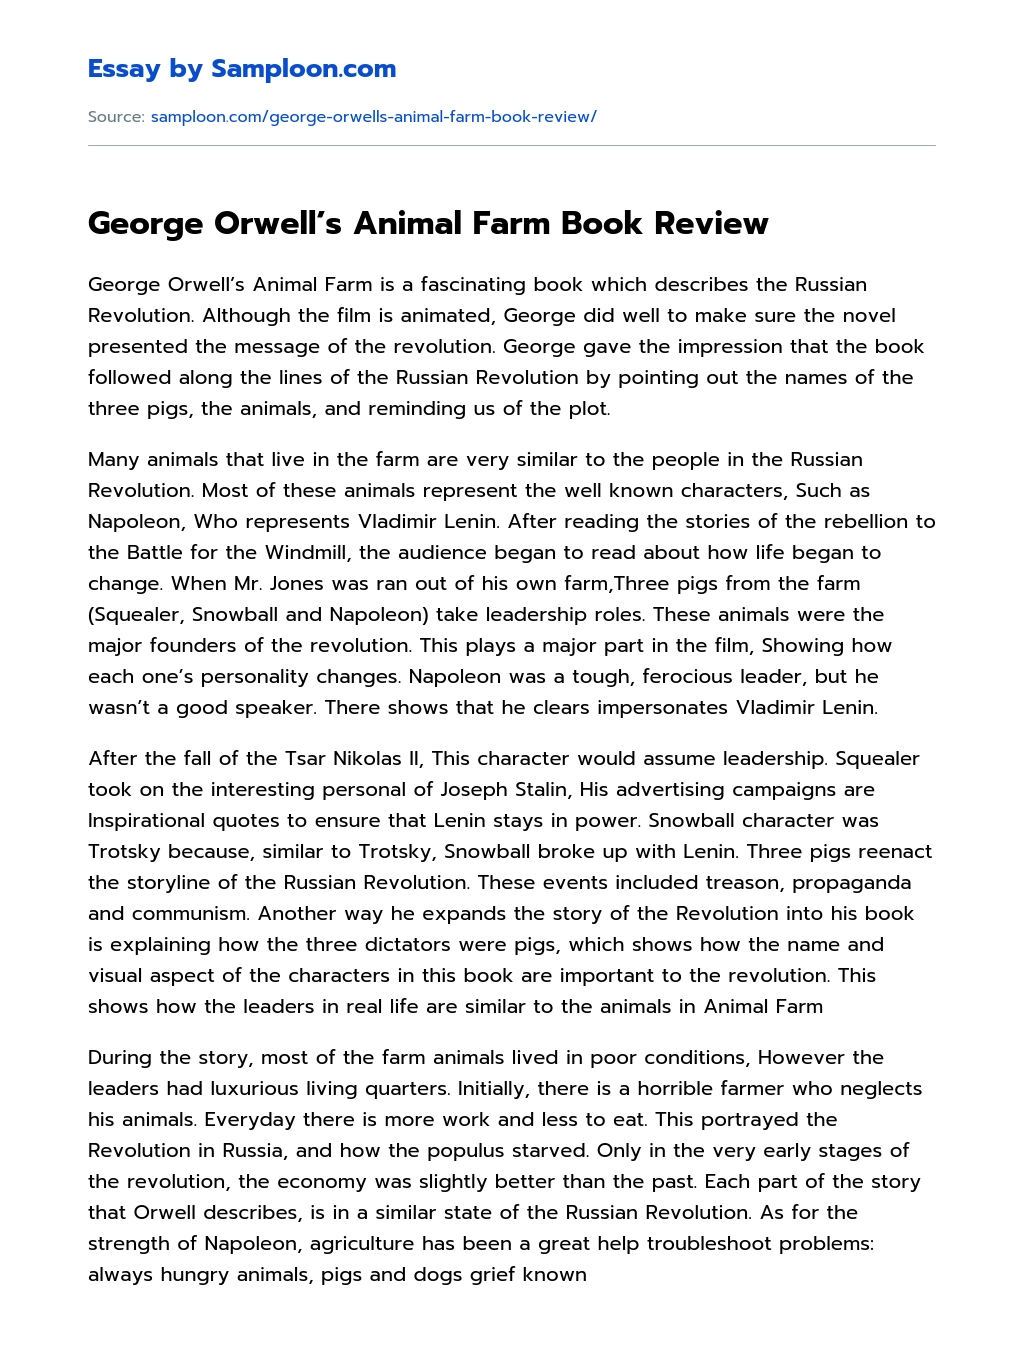 ≫ George Orwell's Animal Farm Book Review Free Essay Sample on 